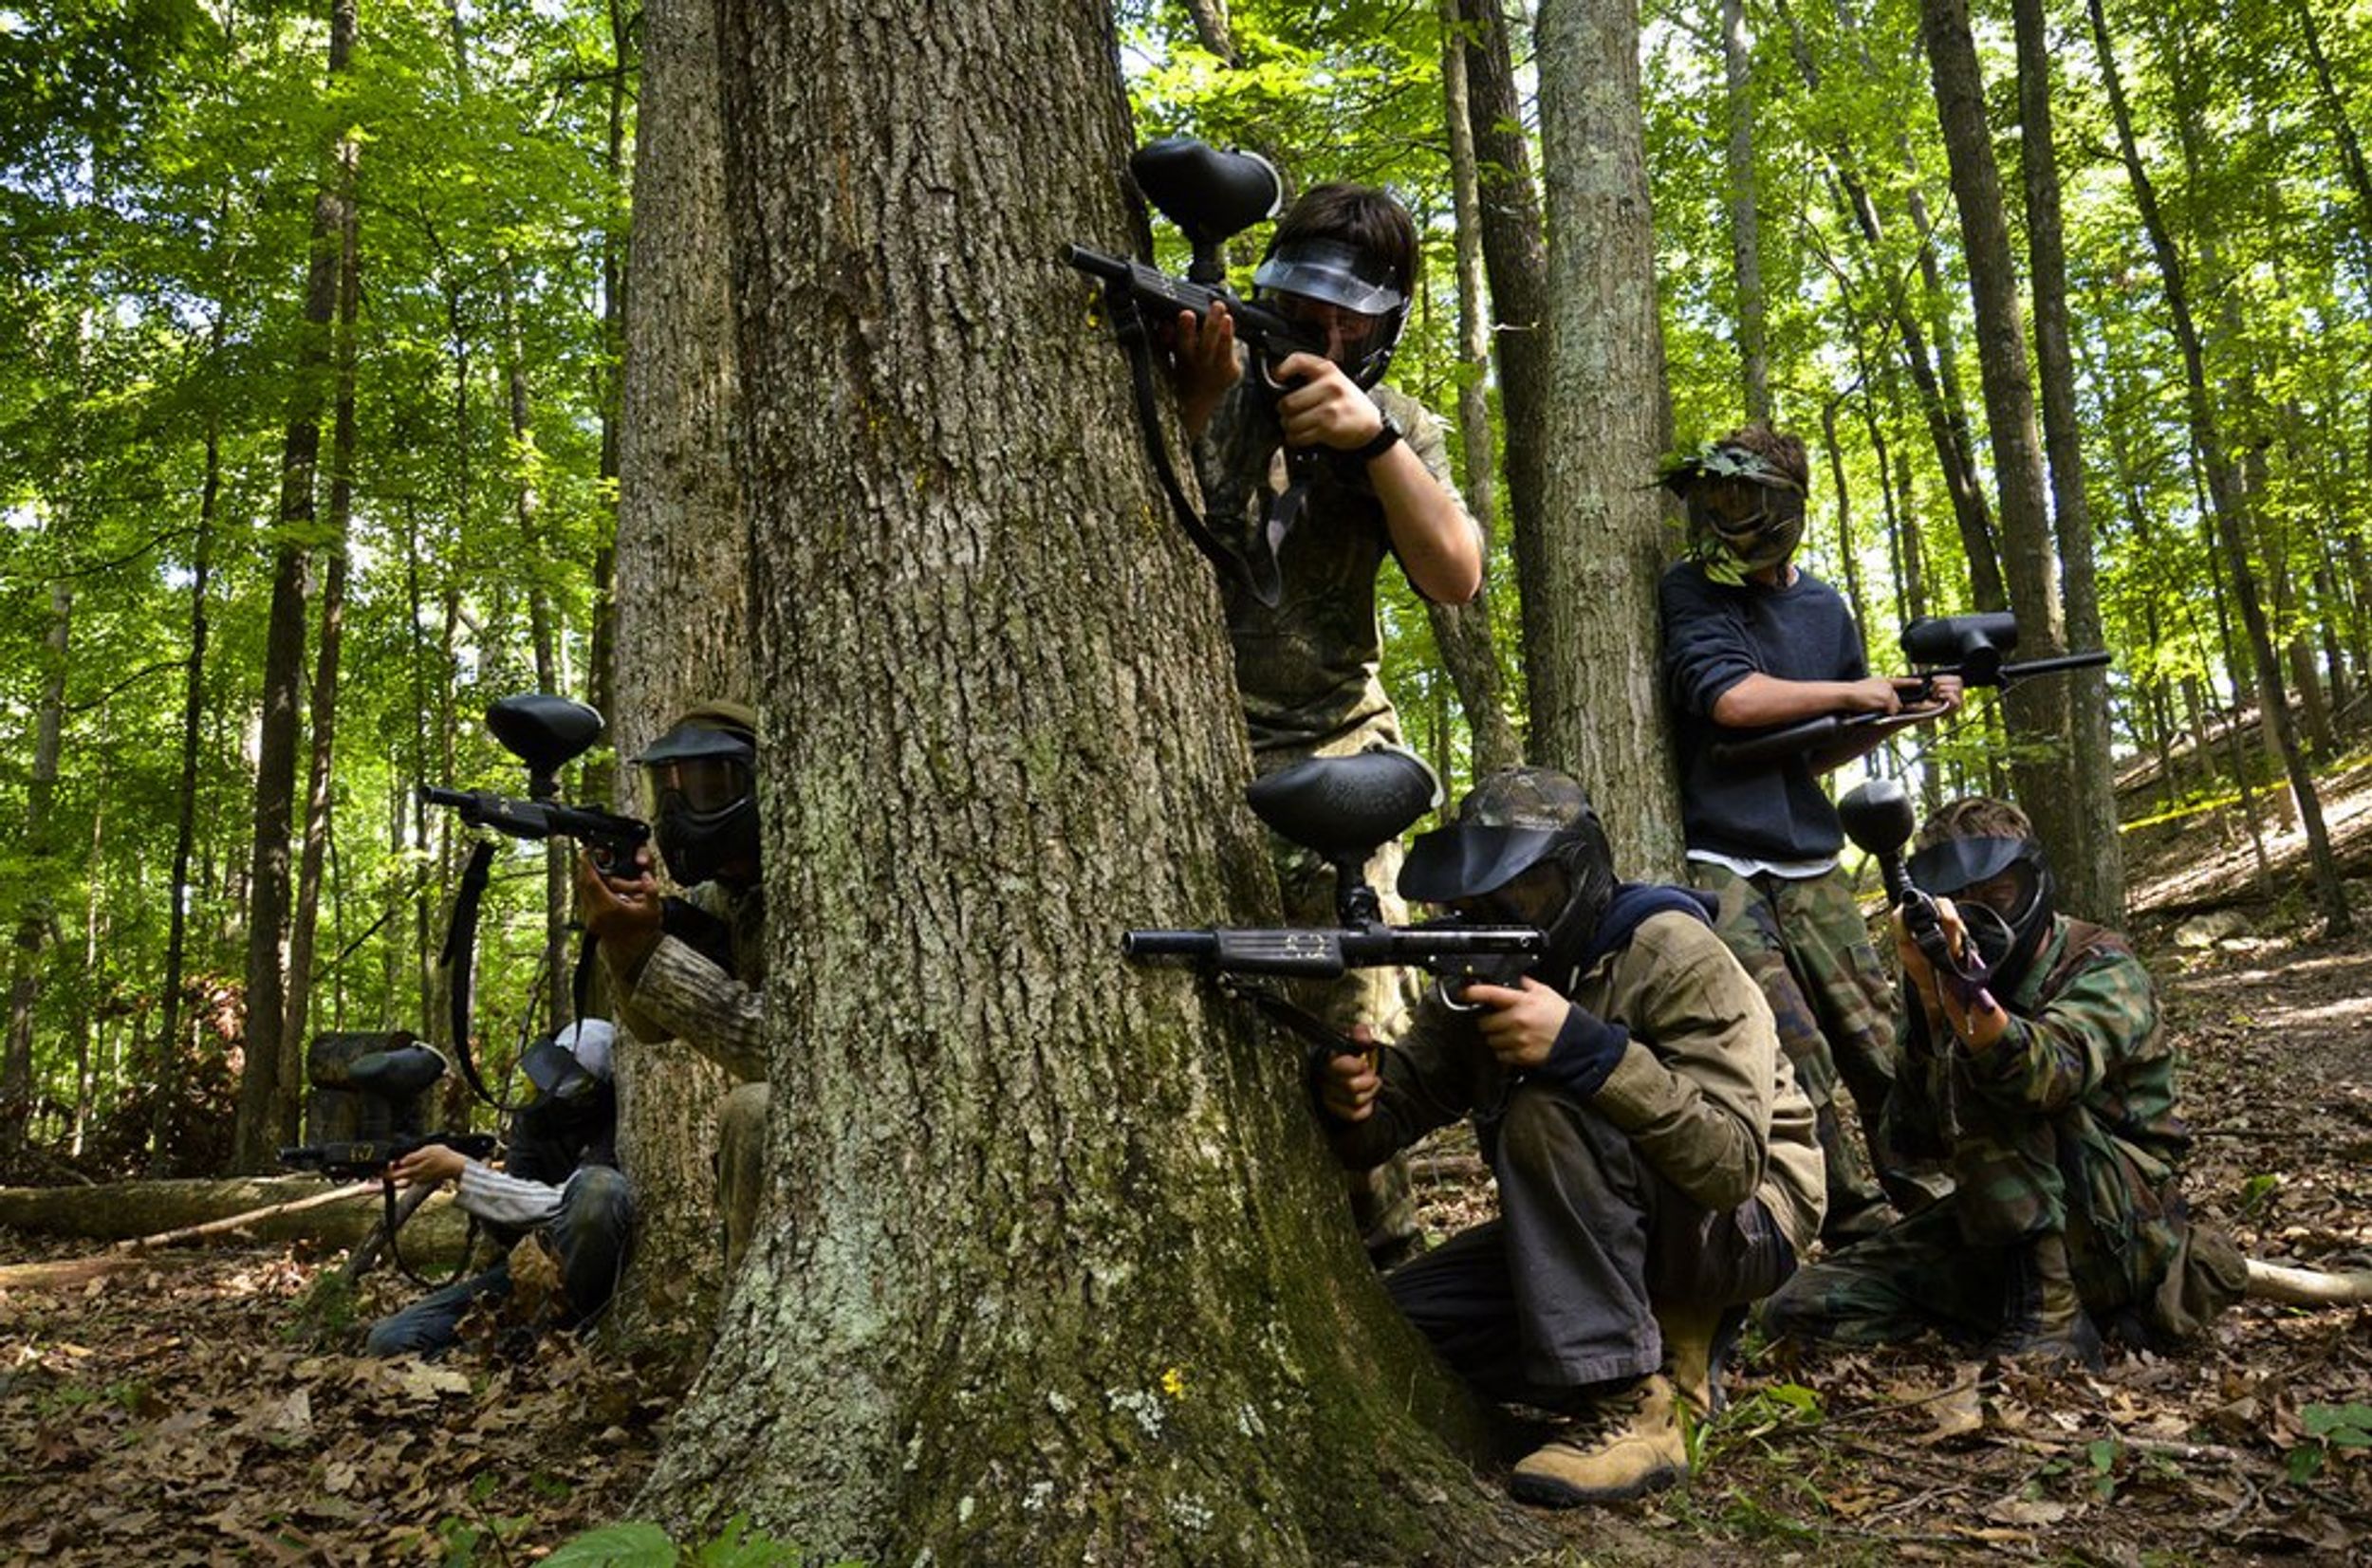 5 Reasons Why You Should Play Paintball